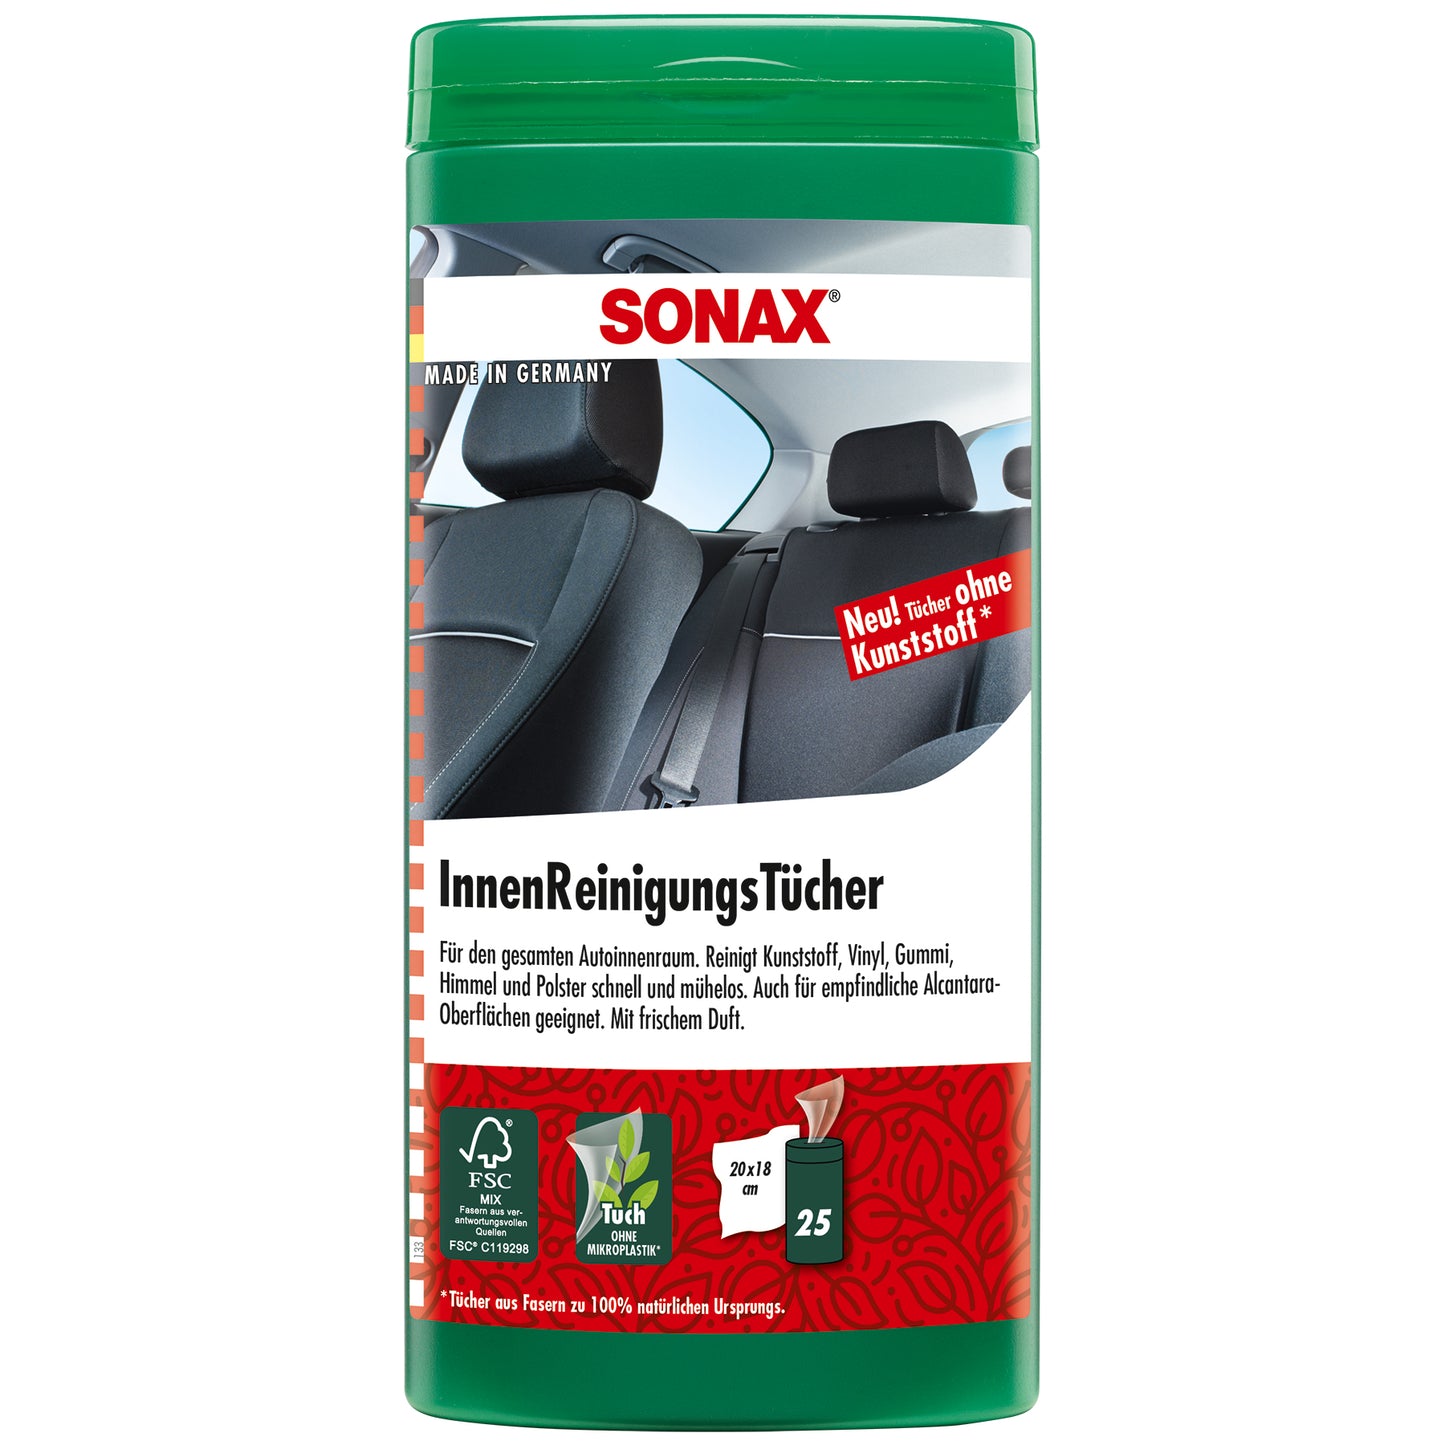 Sonax Interior Cleaning Wipes (2 sizes available)